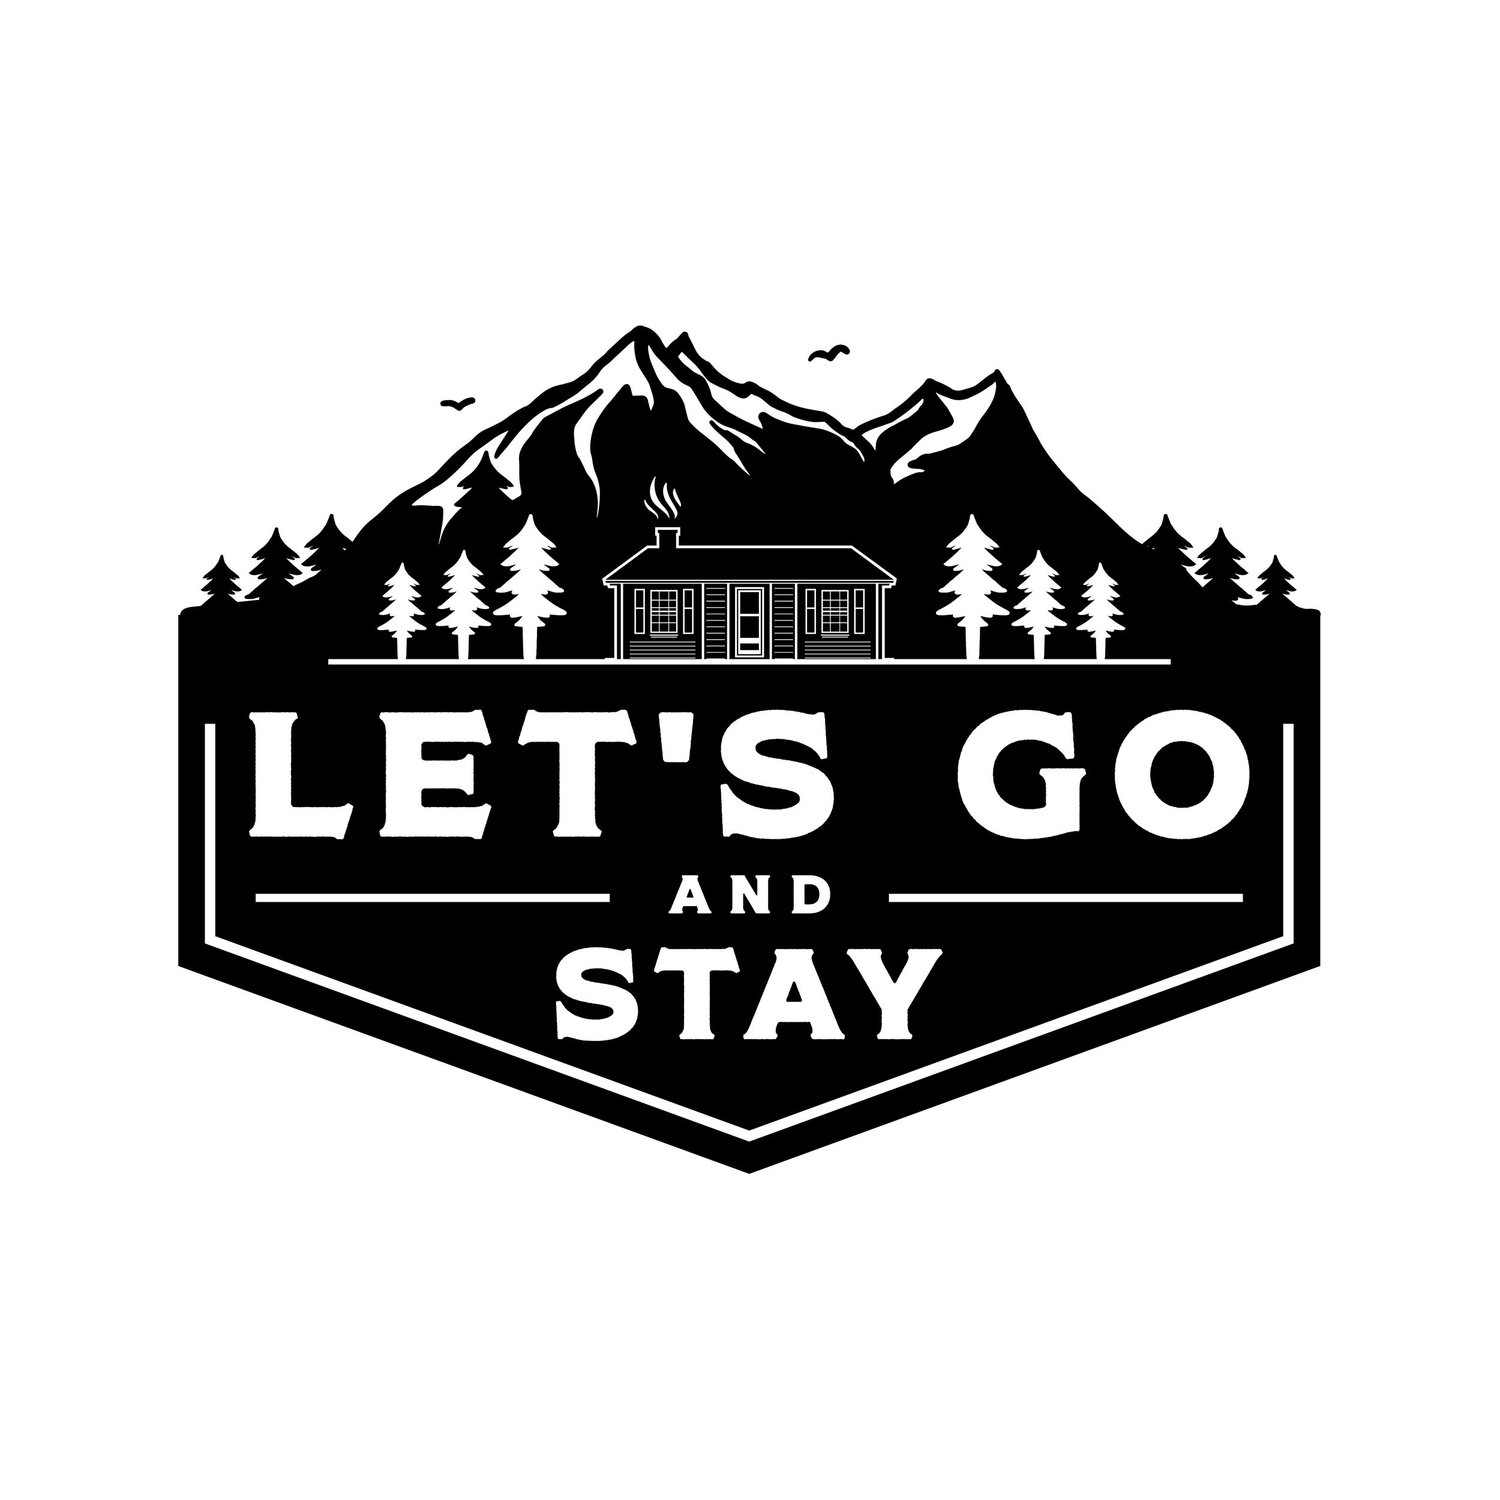 Let's Go and Stay